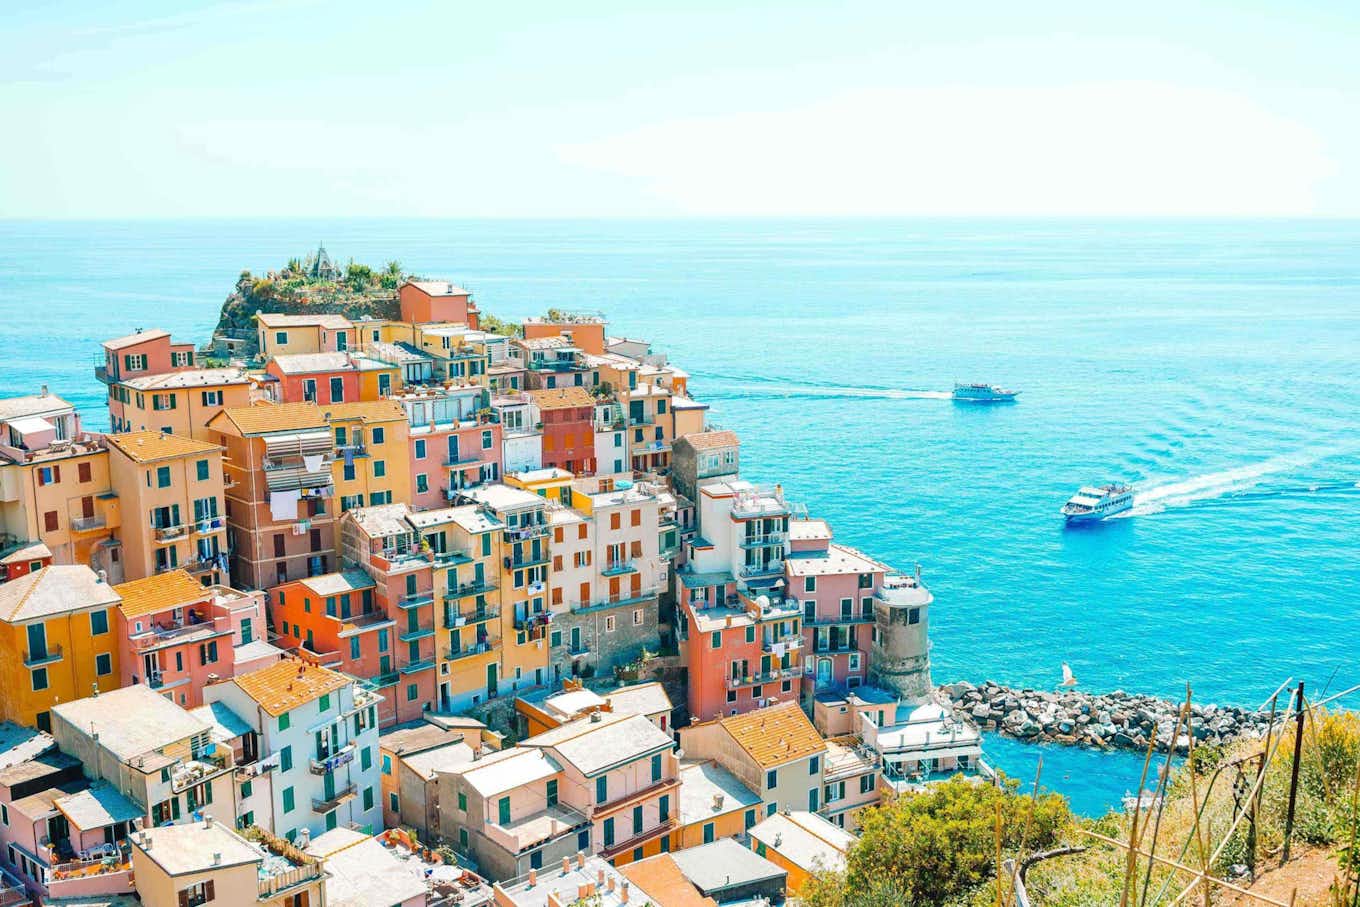 the city and colourful houses in Cinque Terre